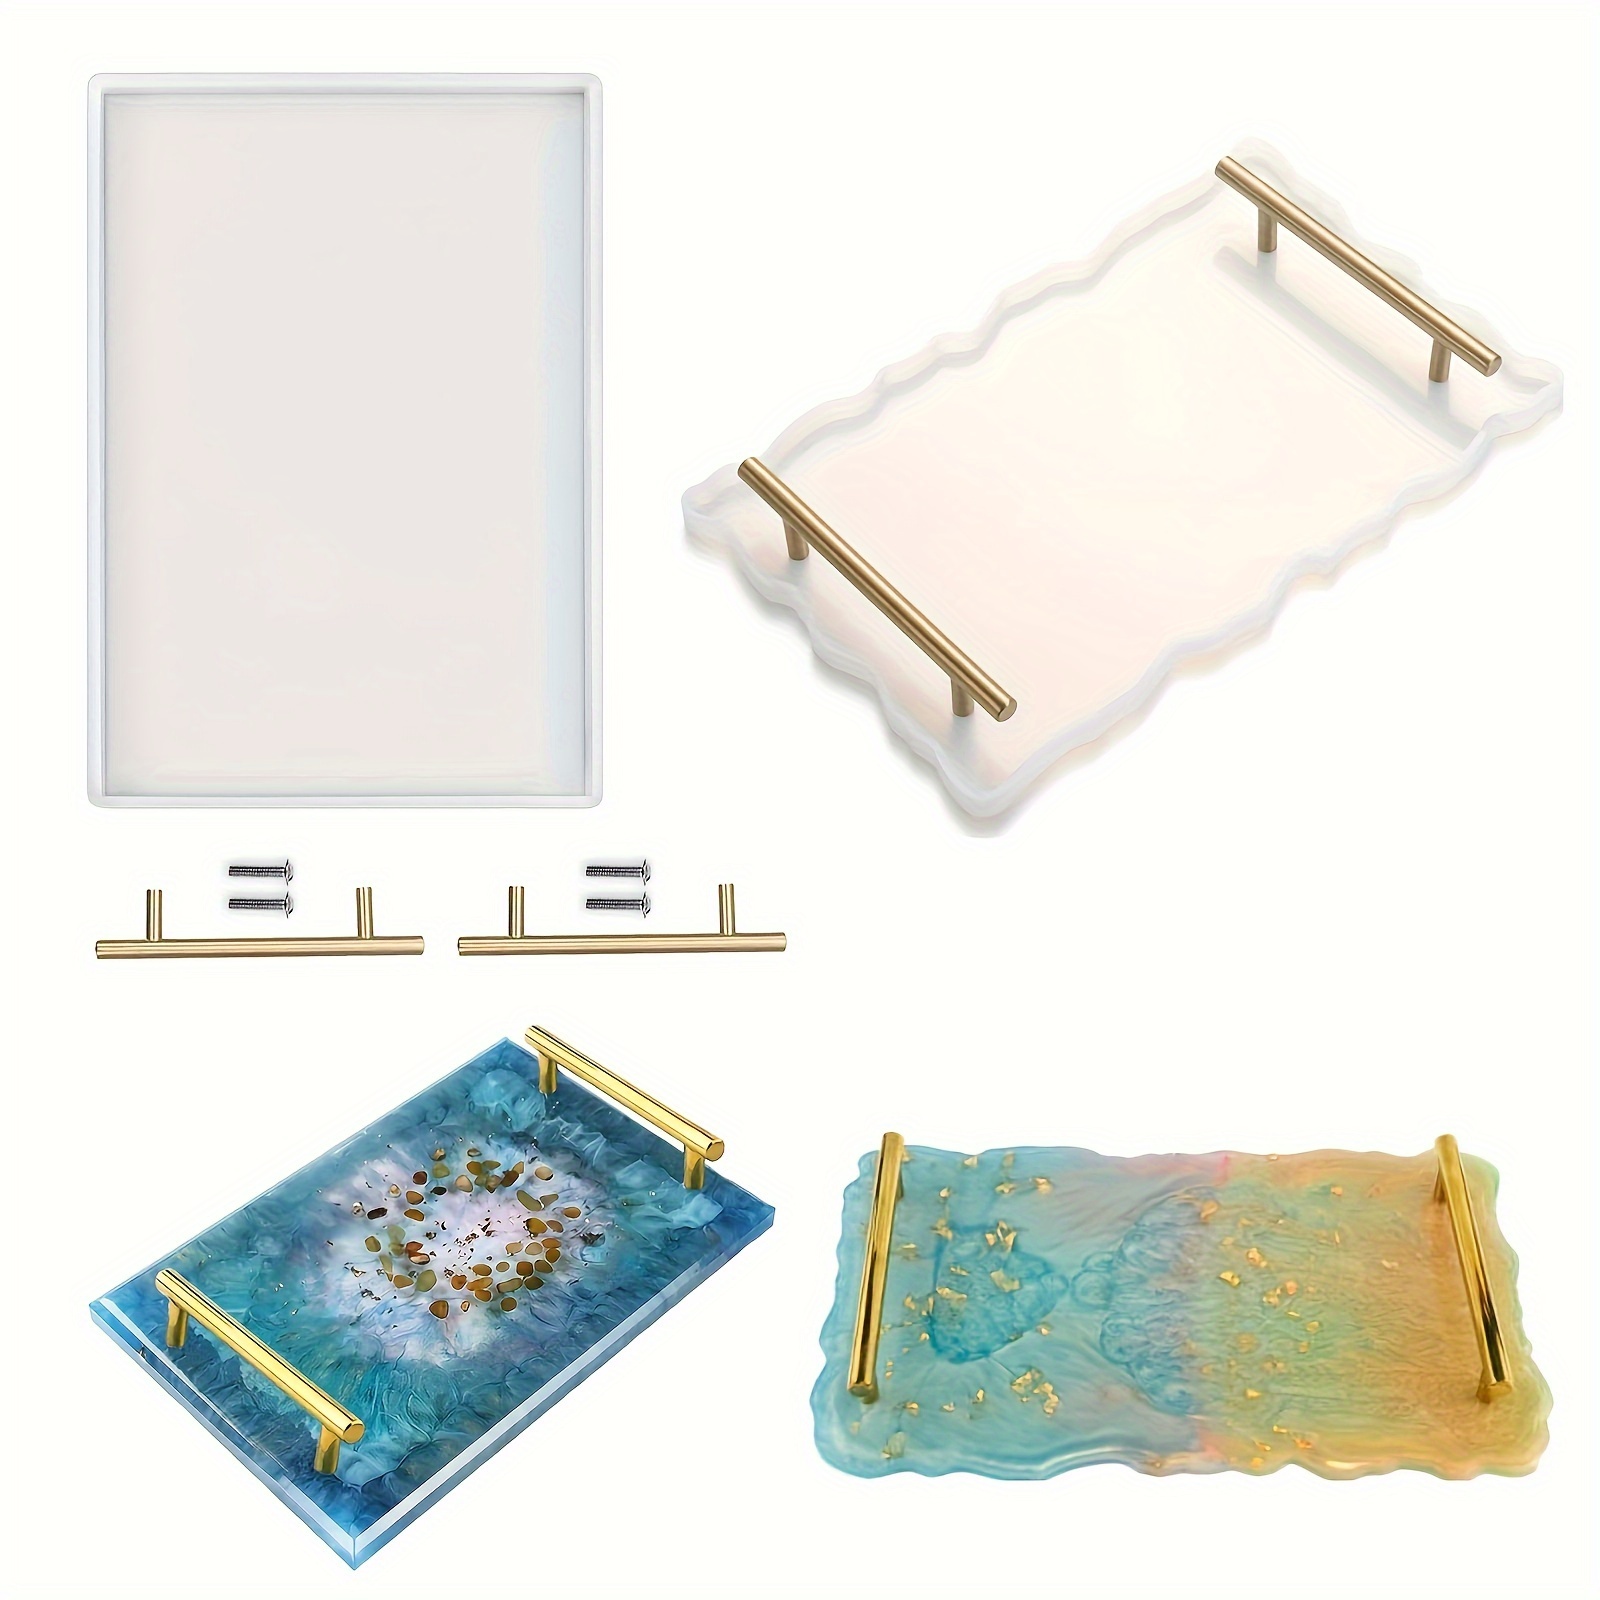 

Large Tray Mold Rectangle Silicone Tray Molds For Resin Casting Deep Flat Tray Resin Mold Silicone With Golden/silvery Handle For Resin Tray Casting Jewelry Display